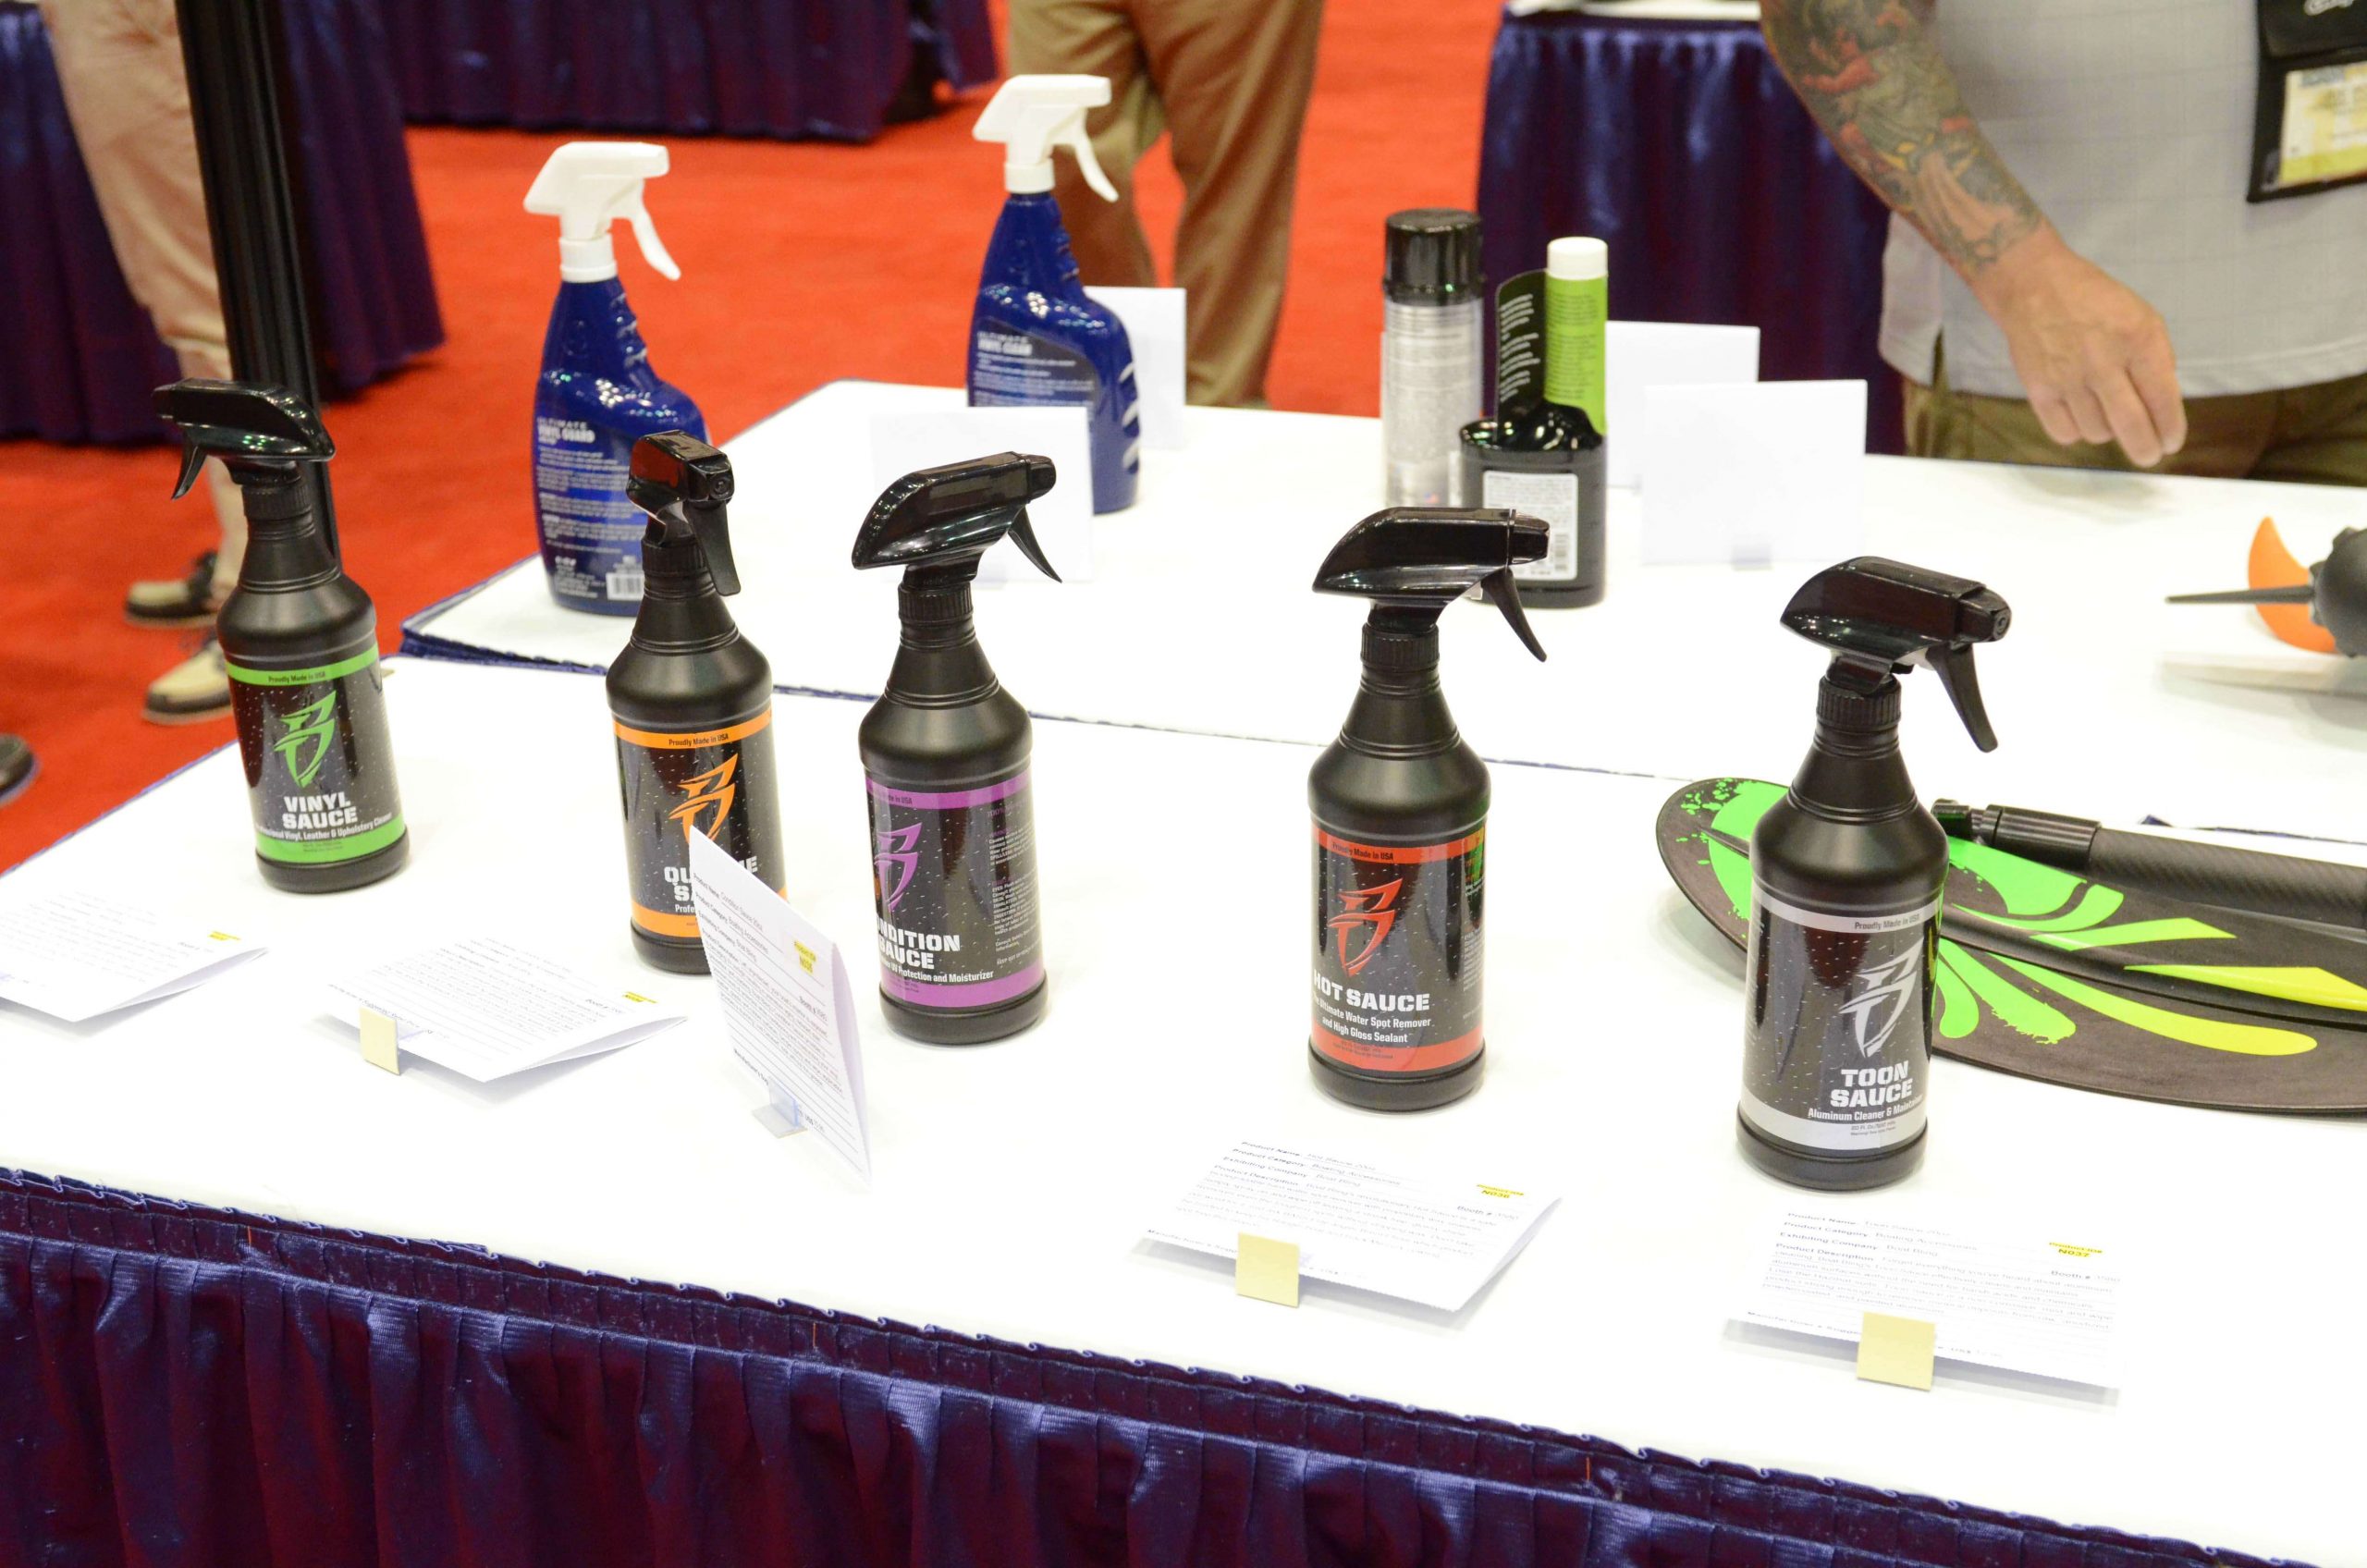 Part of the boating accessories display included cleaning chemicals for boats created by Boat Bling.